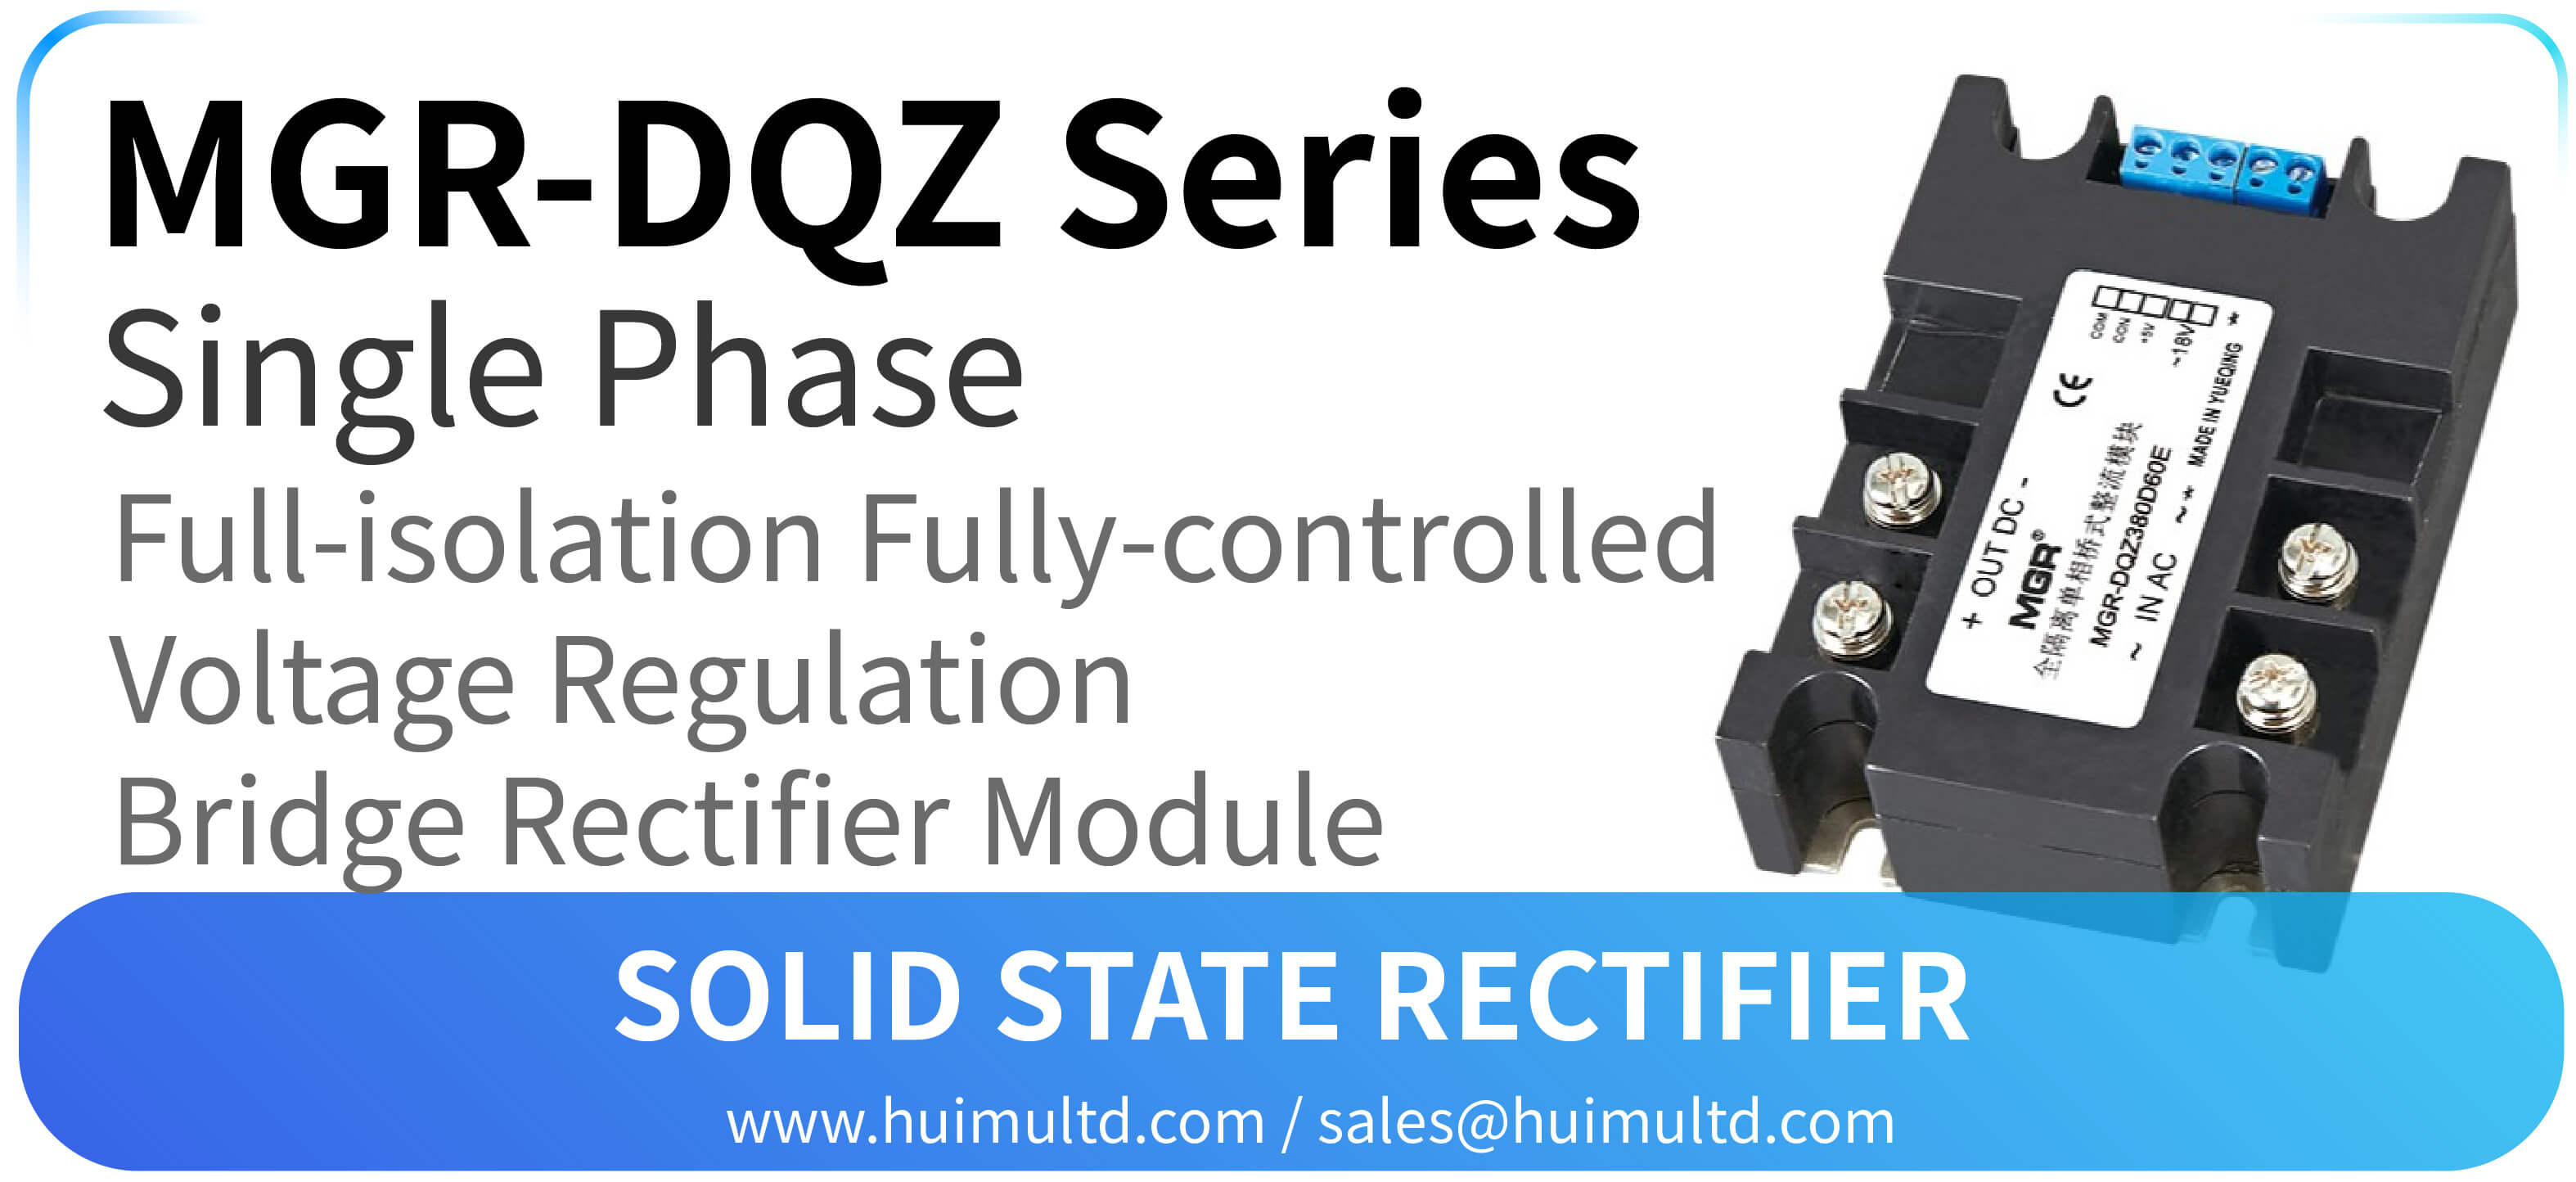 MGR-DQZ Series Solid State Rectifier